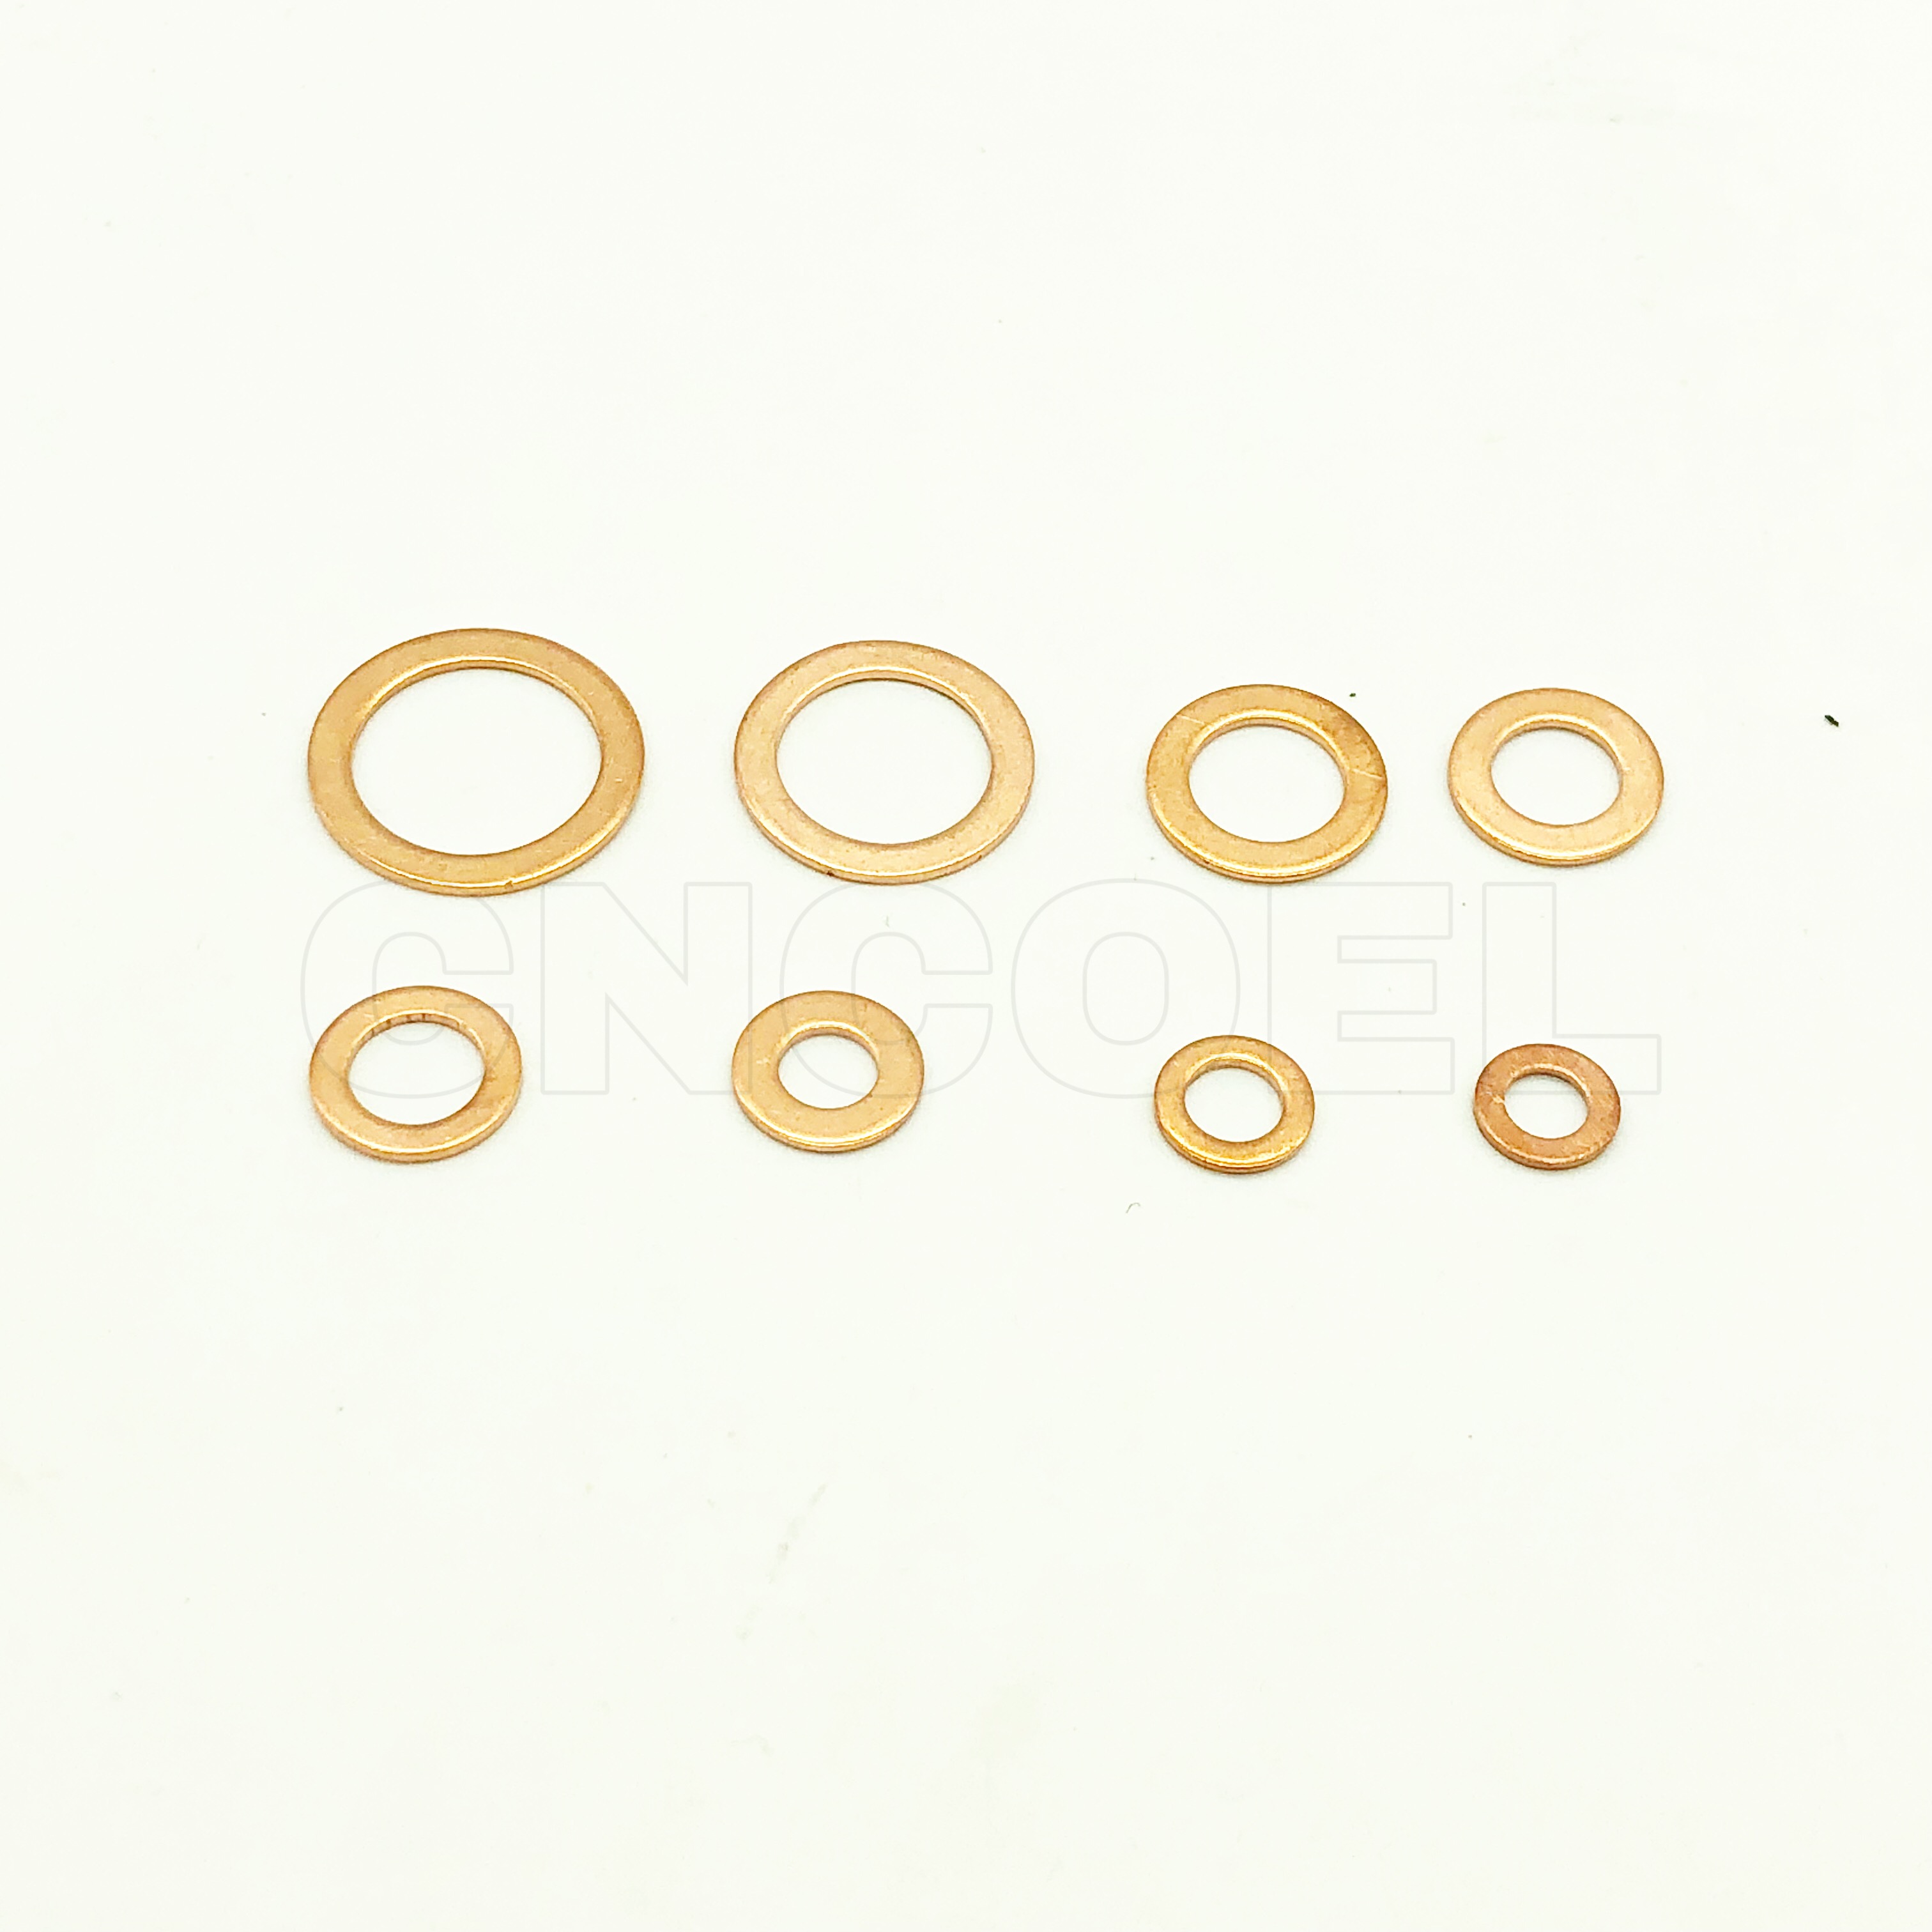 20Pcs Solid Copper Washer Flat Ring Gasket Sump Plug Oil Seal Fittings M10 M8 M6 M5 M14 M16 Fastener Hardware Accessories